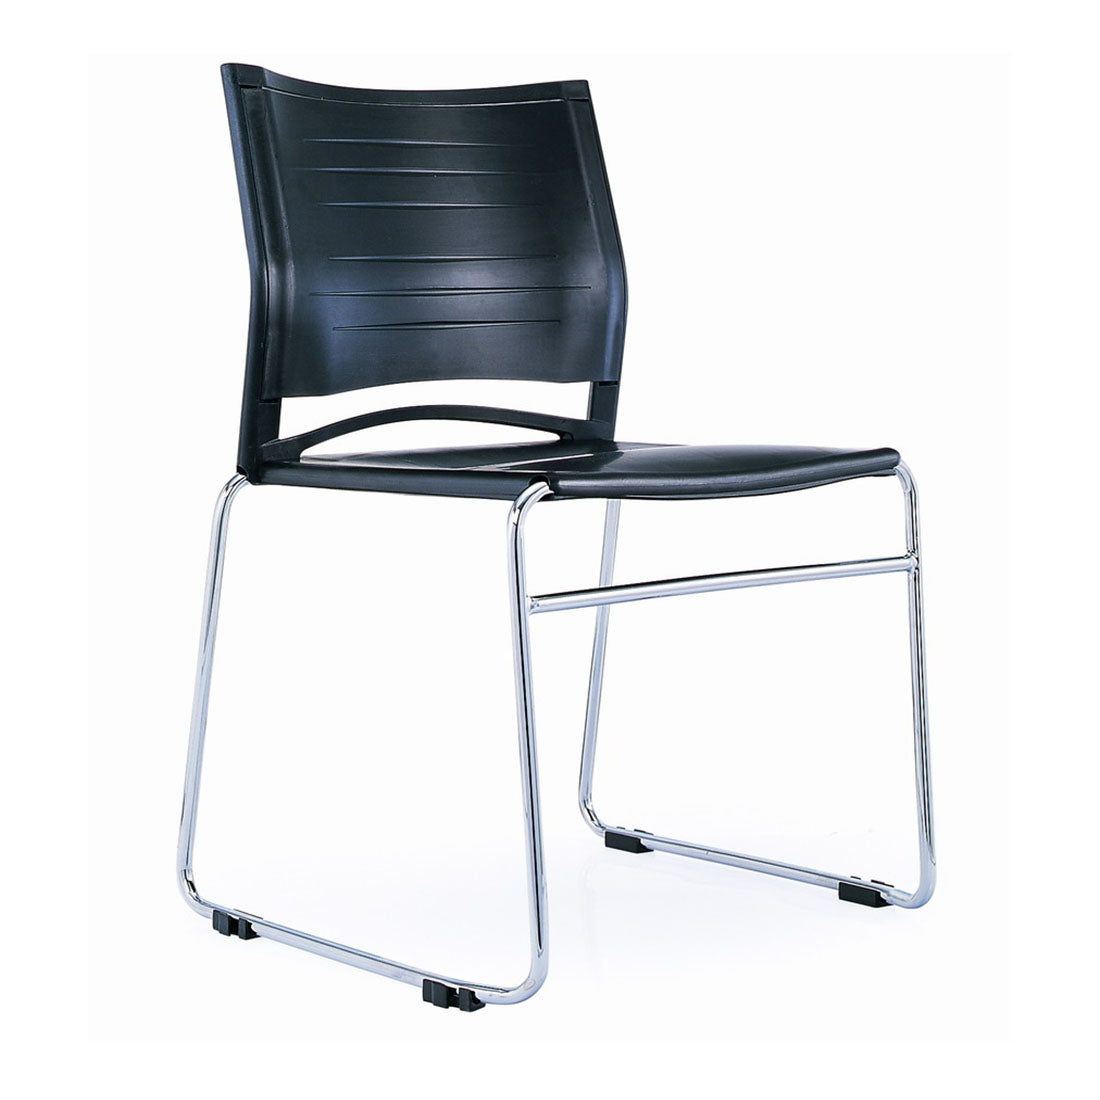 Zest Visitor Office Chair - switchoffice.com.au